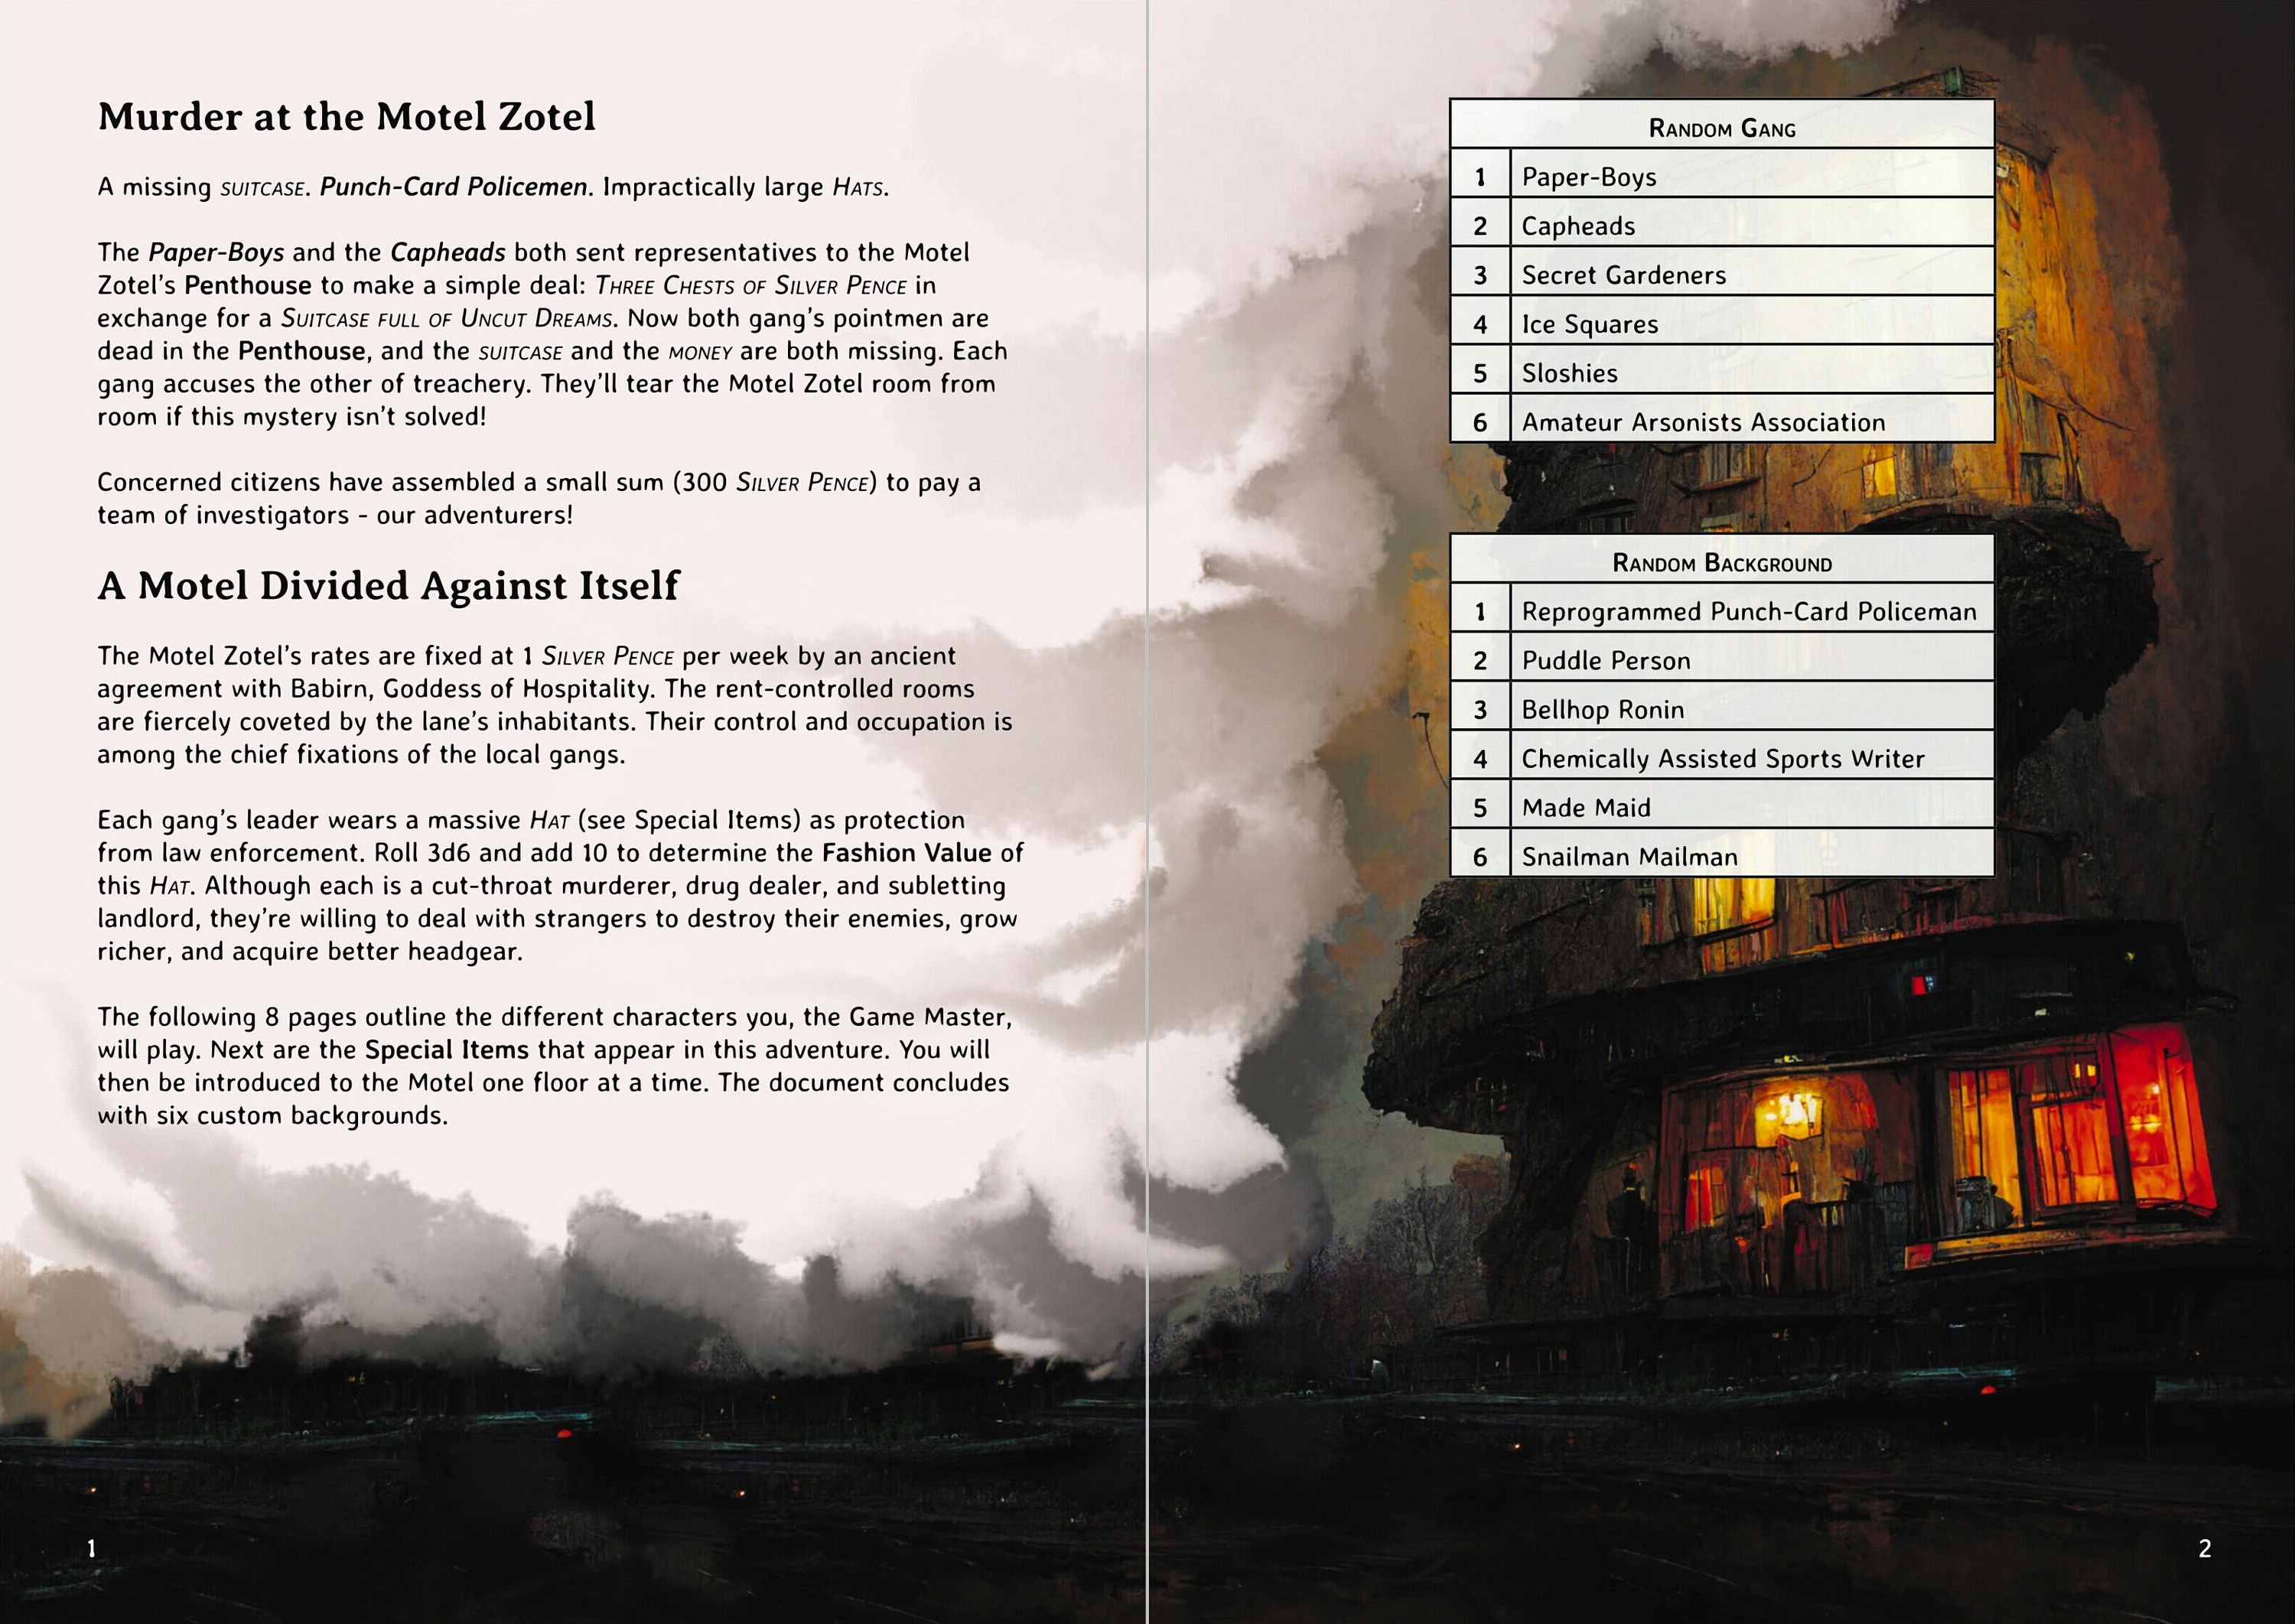 A two-page spread. The text on the left outlines the scenario with dark shapes along the bottom. On the facing page, the dark shapes resolve into a house that effectively becomes the page background, with two random tables overlaying it.